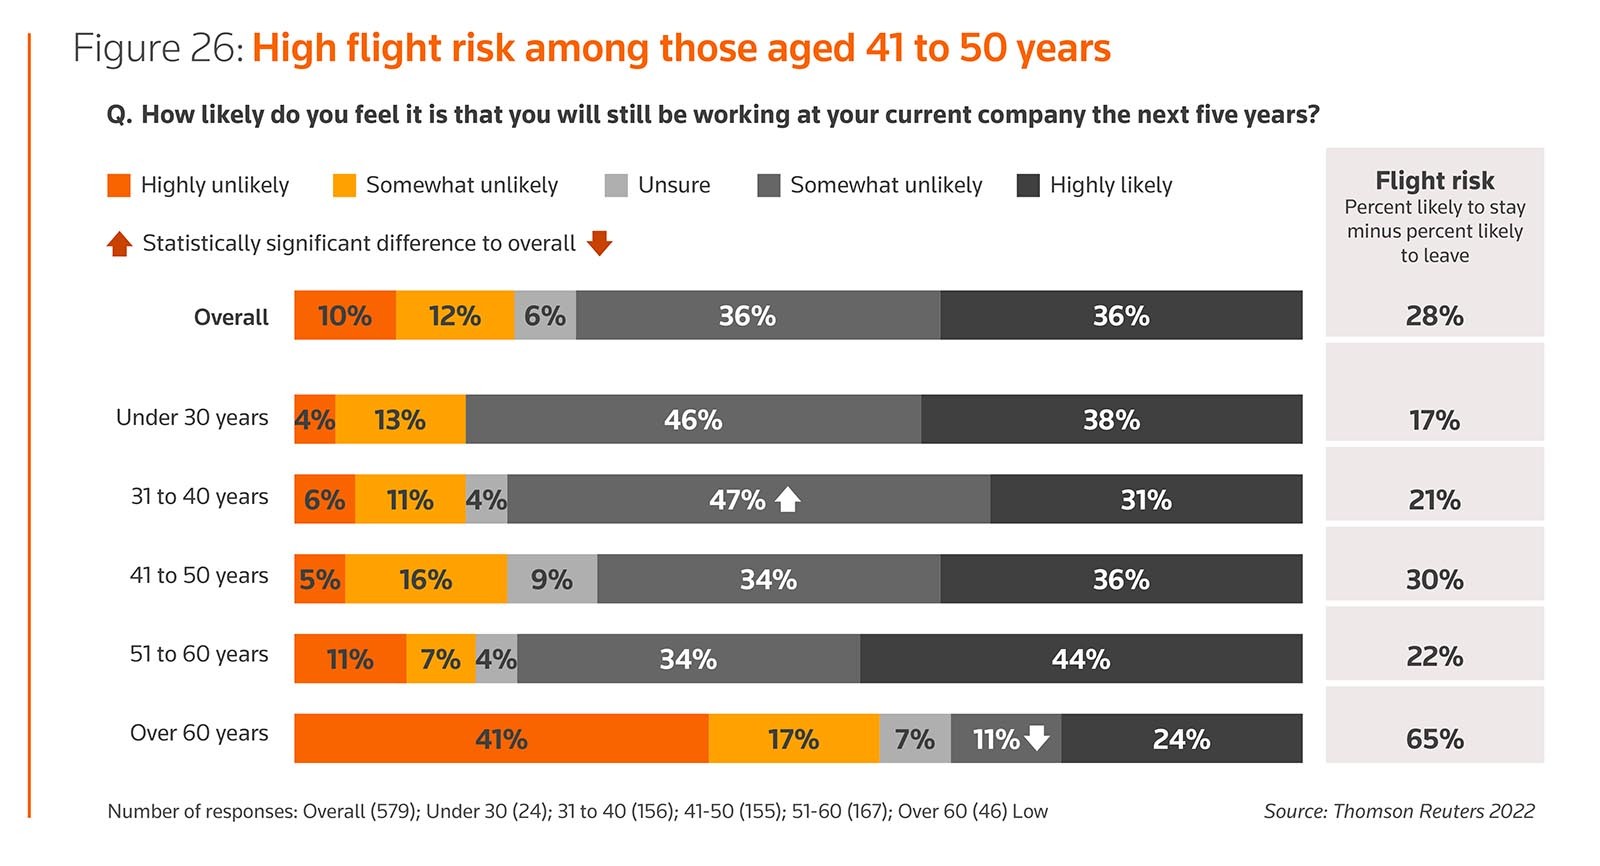 Figure 26: High flight risk among those aged 41 to 50 years